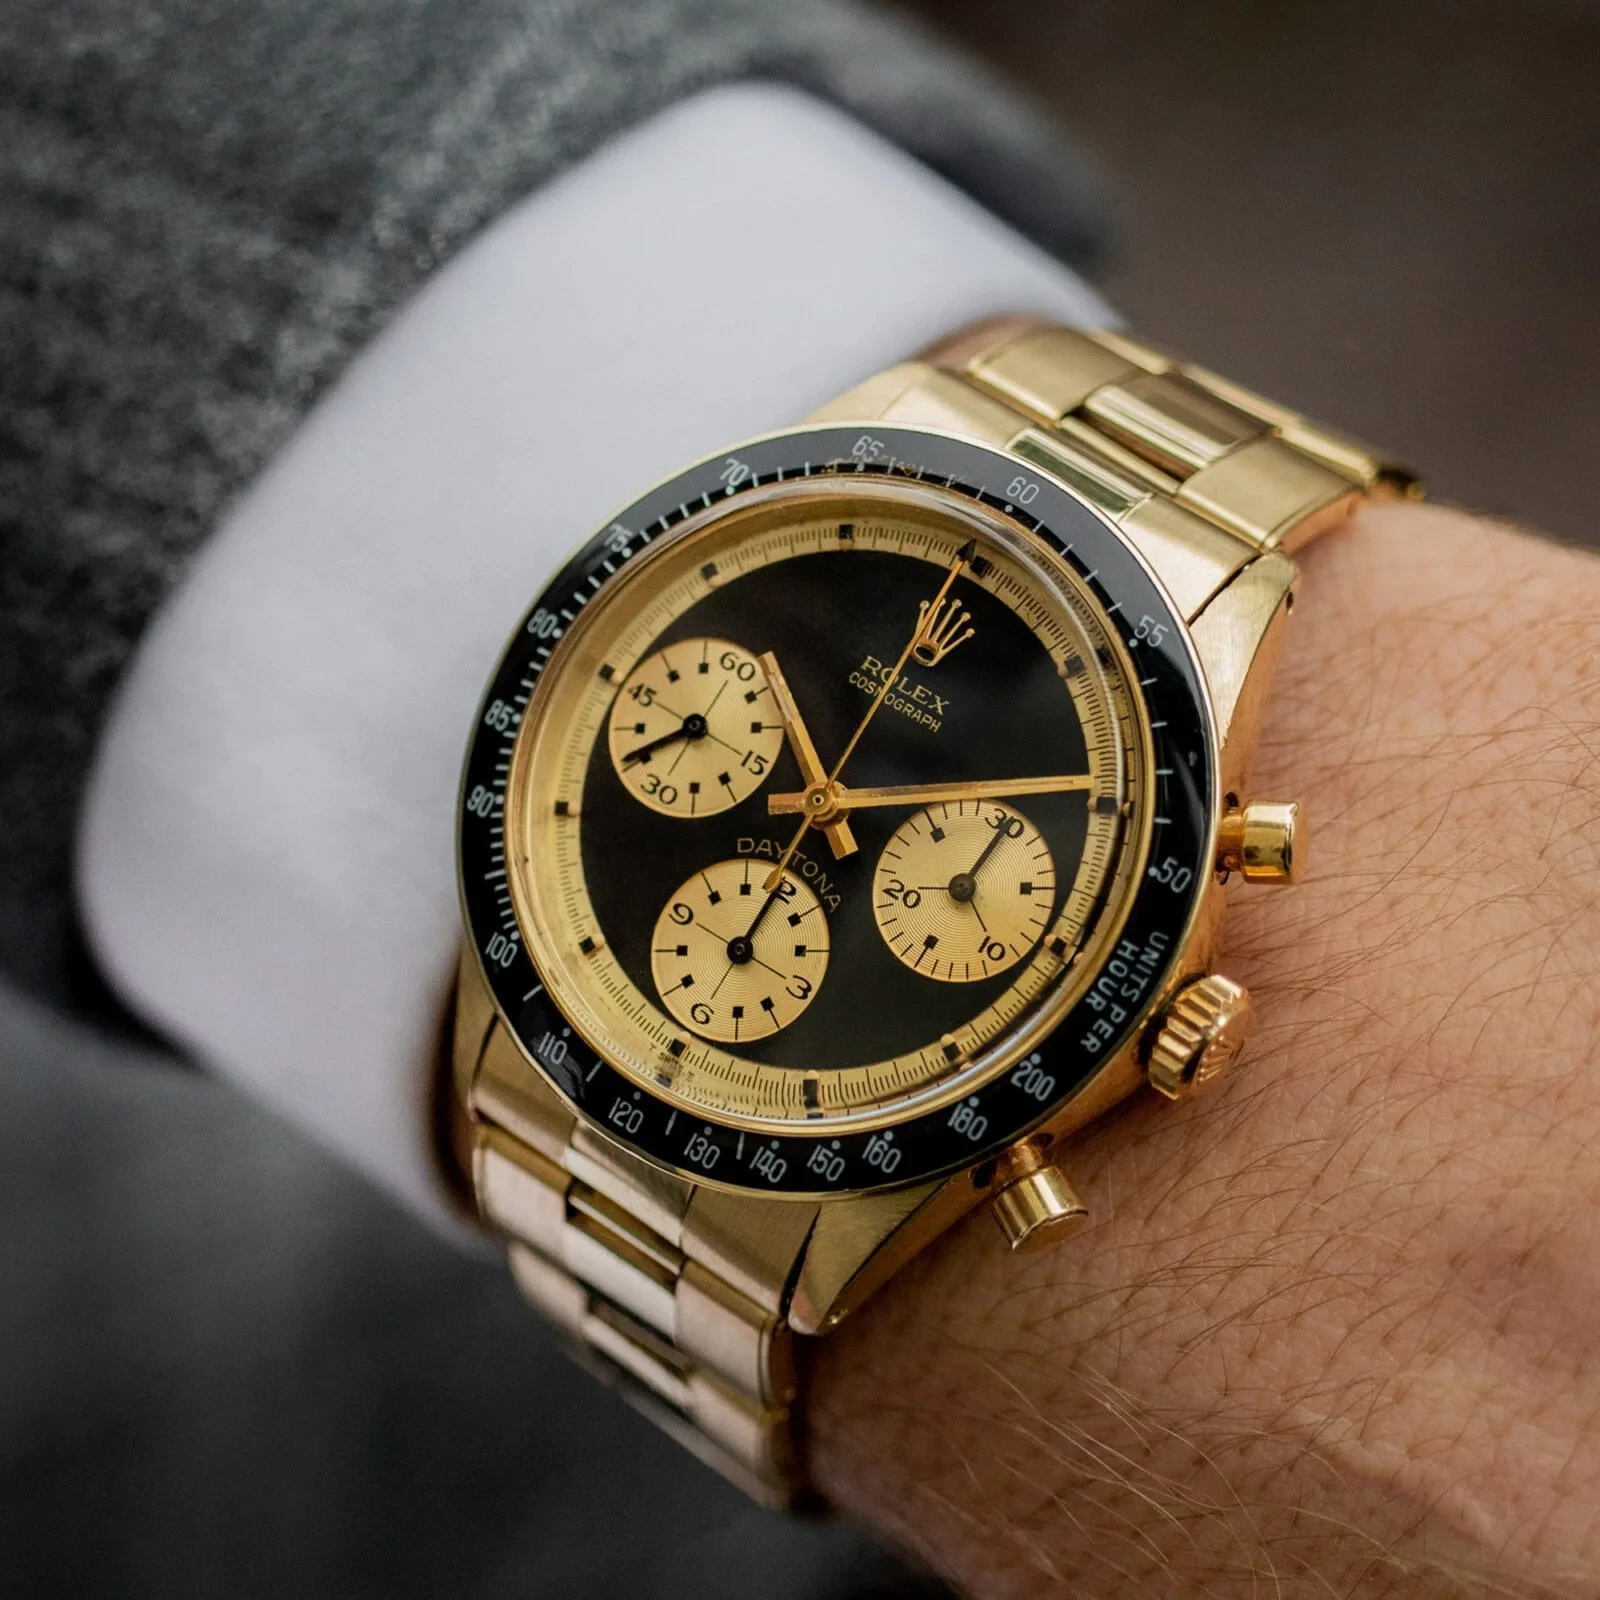 Bringing the Rolex Daytona's Magnificence to Light: An Exploration of Its Lasting Legacy